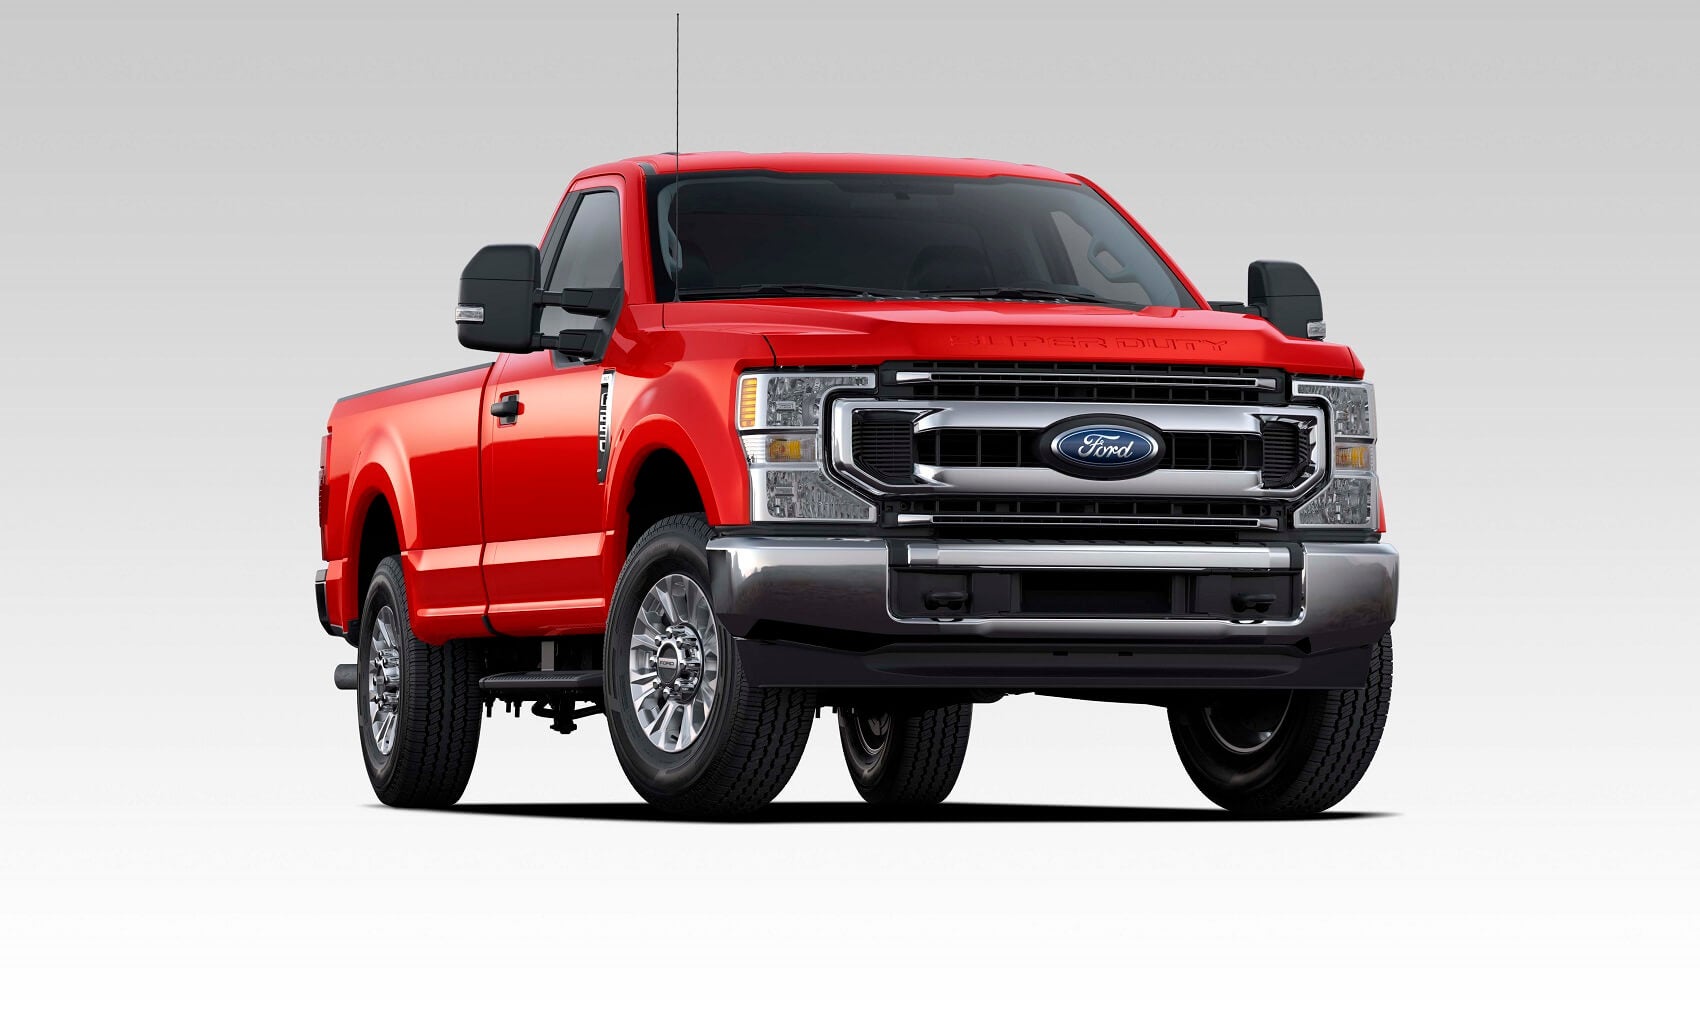 New Red 2021 Ford Super Duty F-250 against a grey and white gradient background.